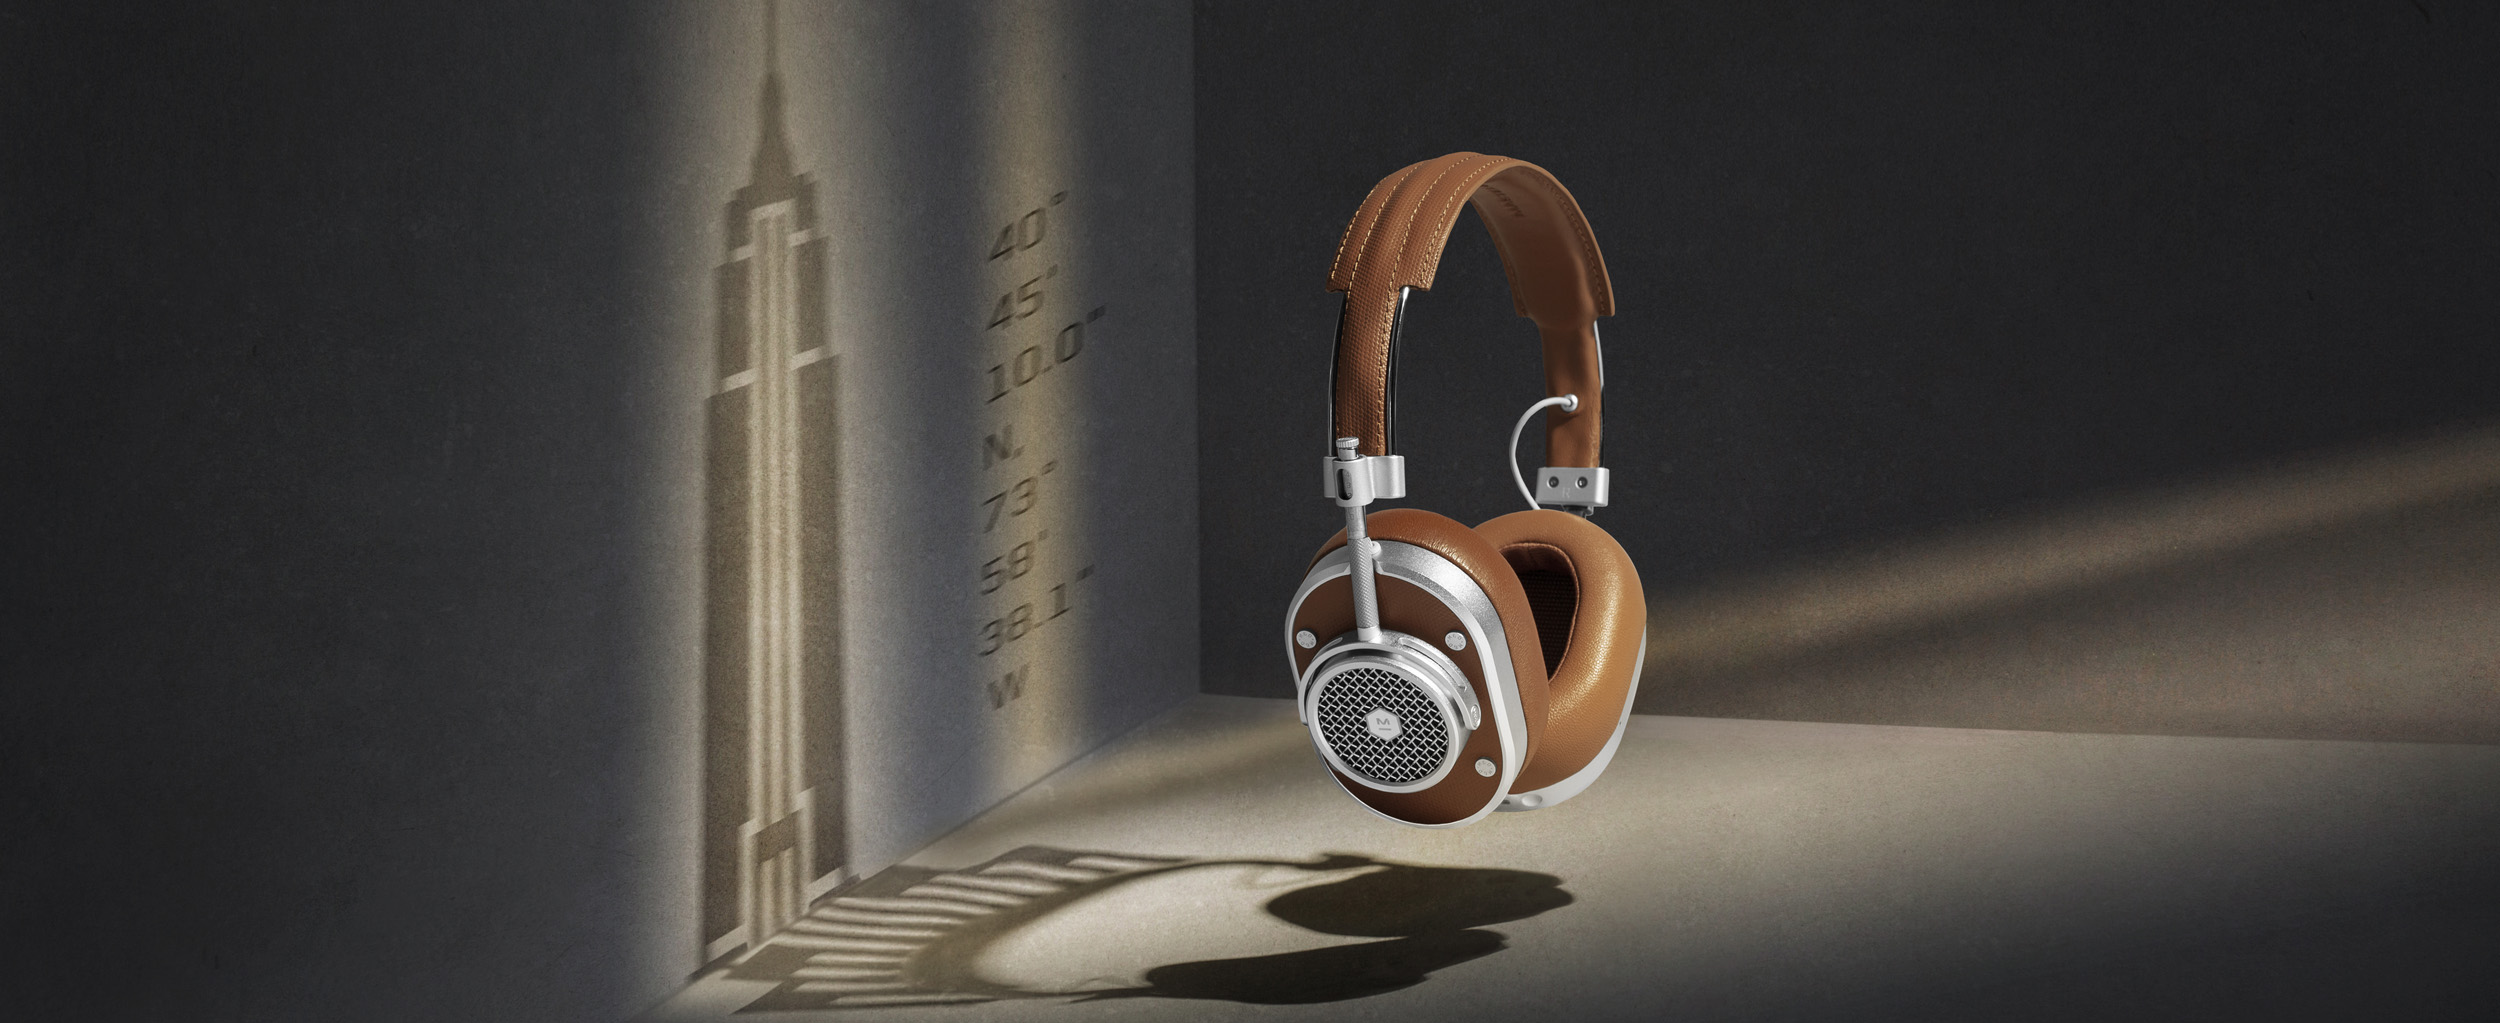 Introducing The MH40 Wireless Over-Ear Headphones: Headphones For Work, Studying, And Focus